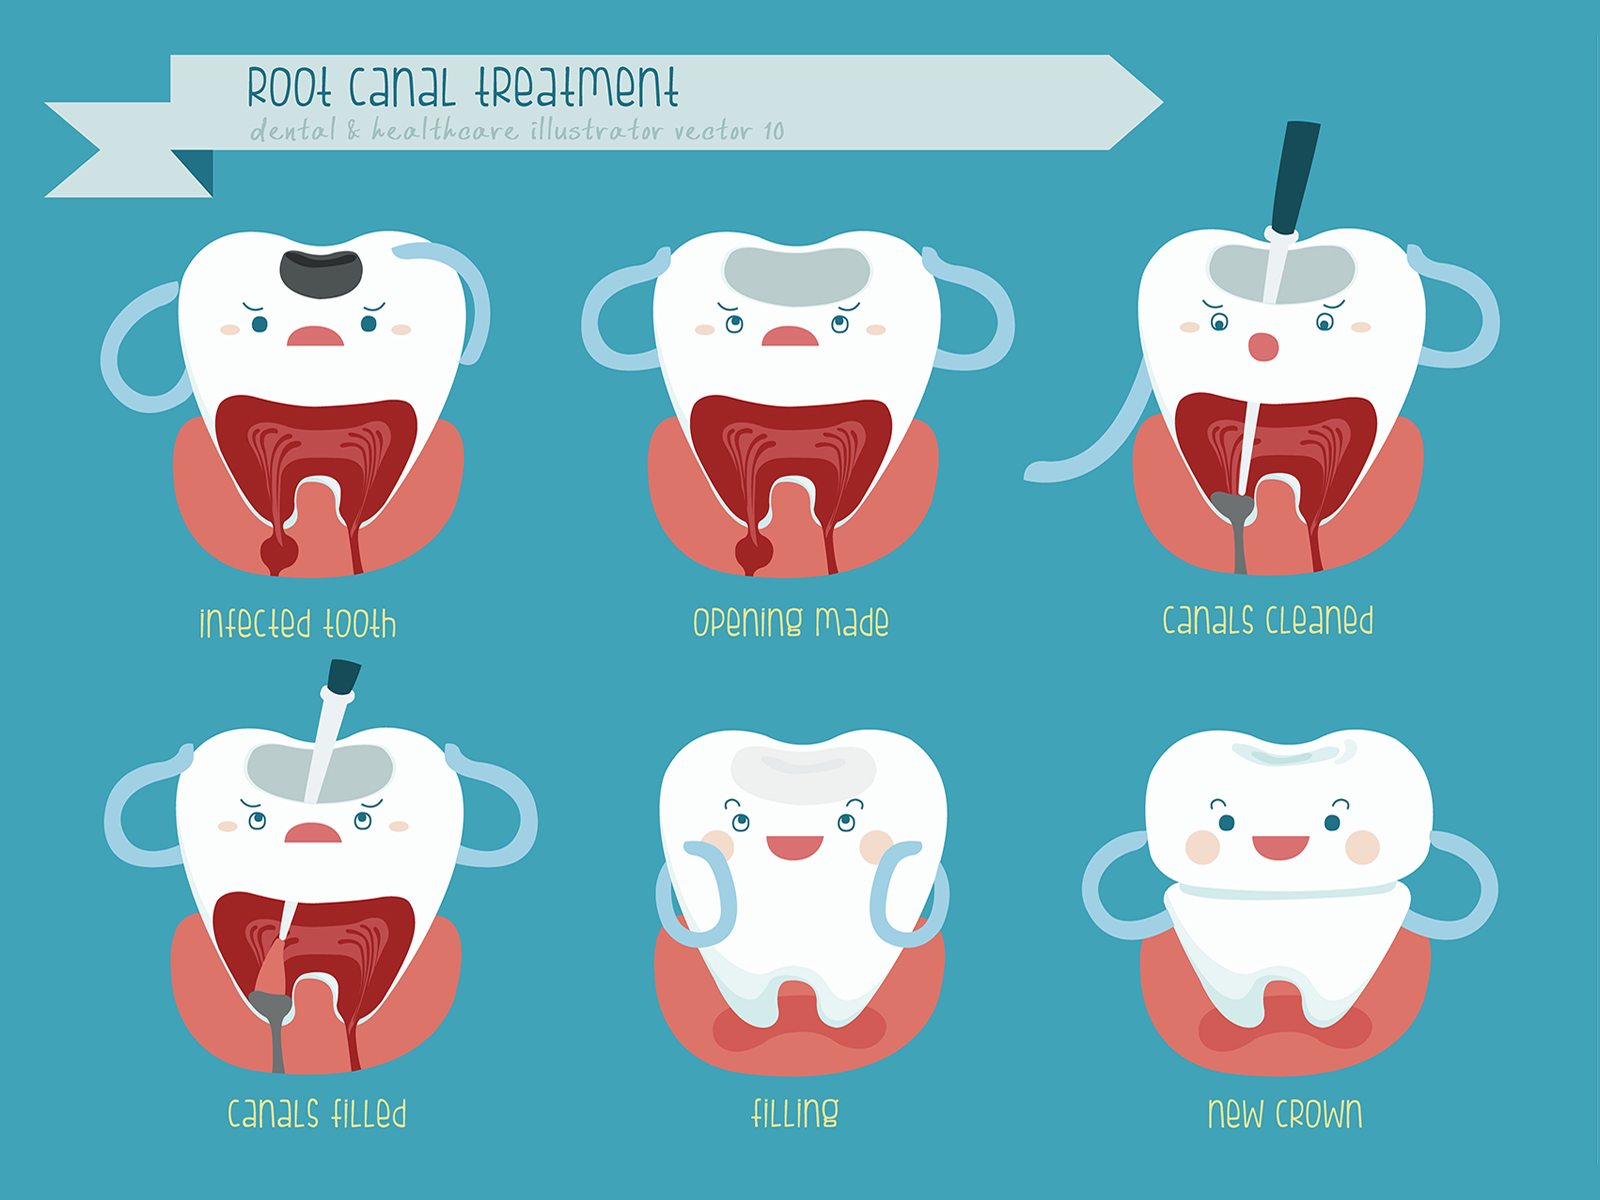 Can Teeth Still Hurt After Root Canal?